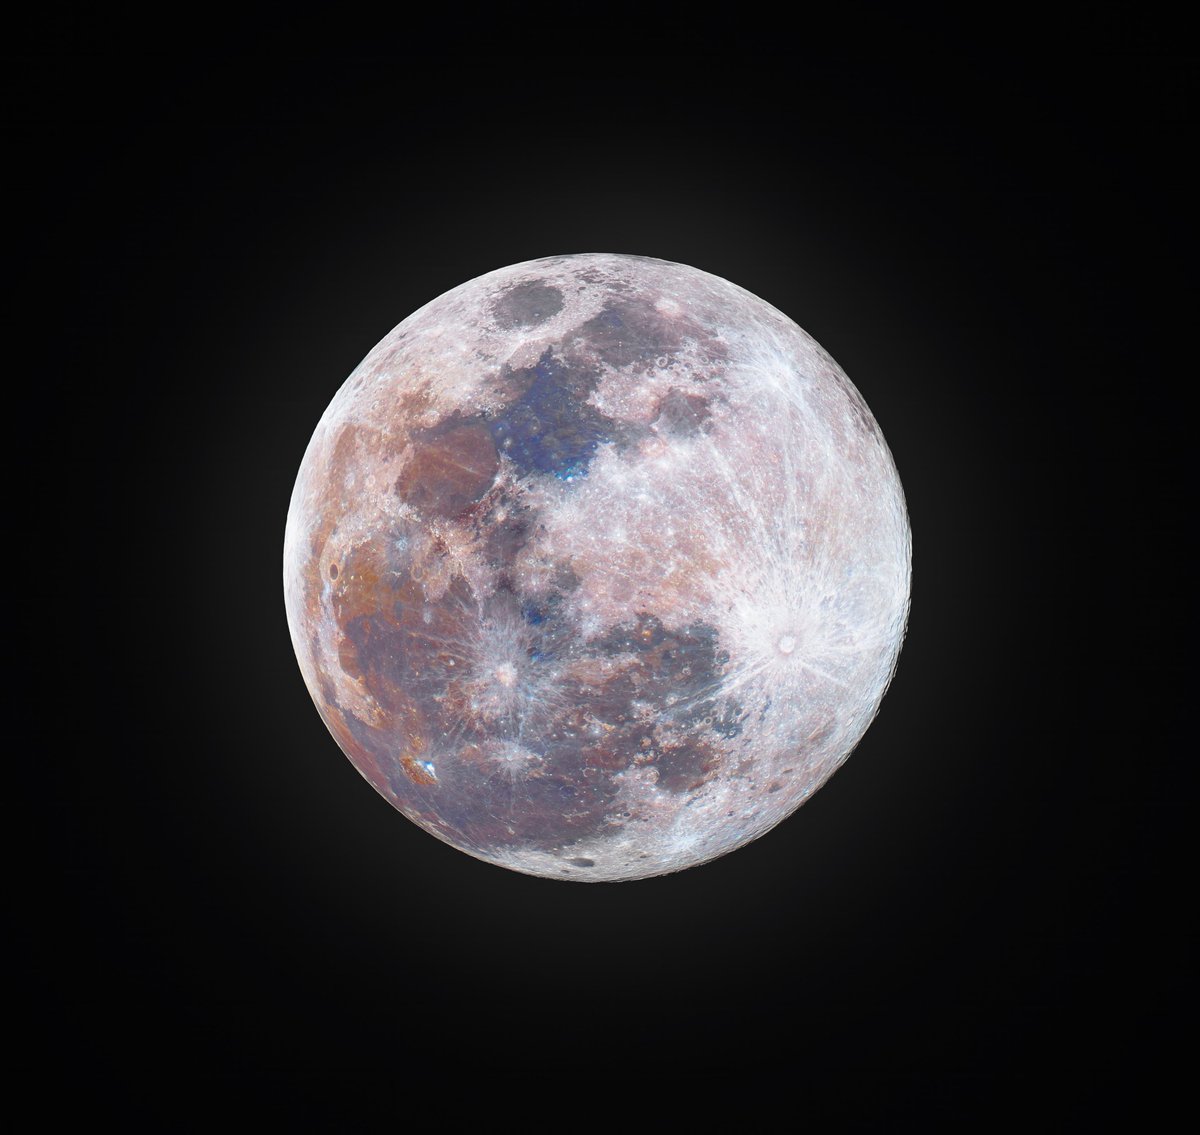 I used two telescopes and two cameras to capture this super high-contrast view of the Snow Moon this morning. The colors are real, a product of using thousands extremely high quality images to generate the final photo.